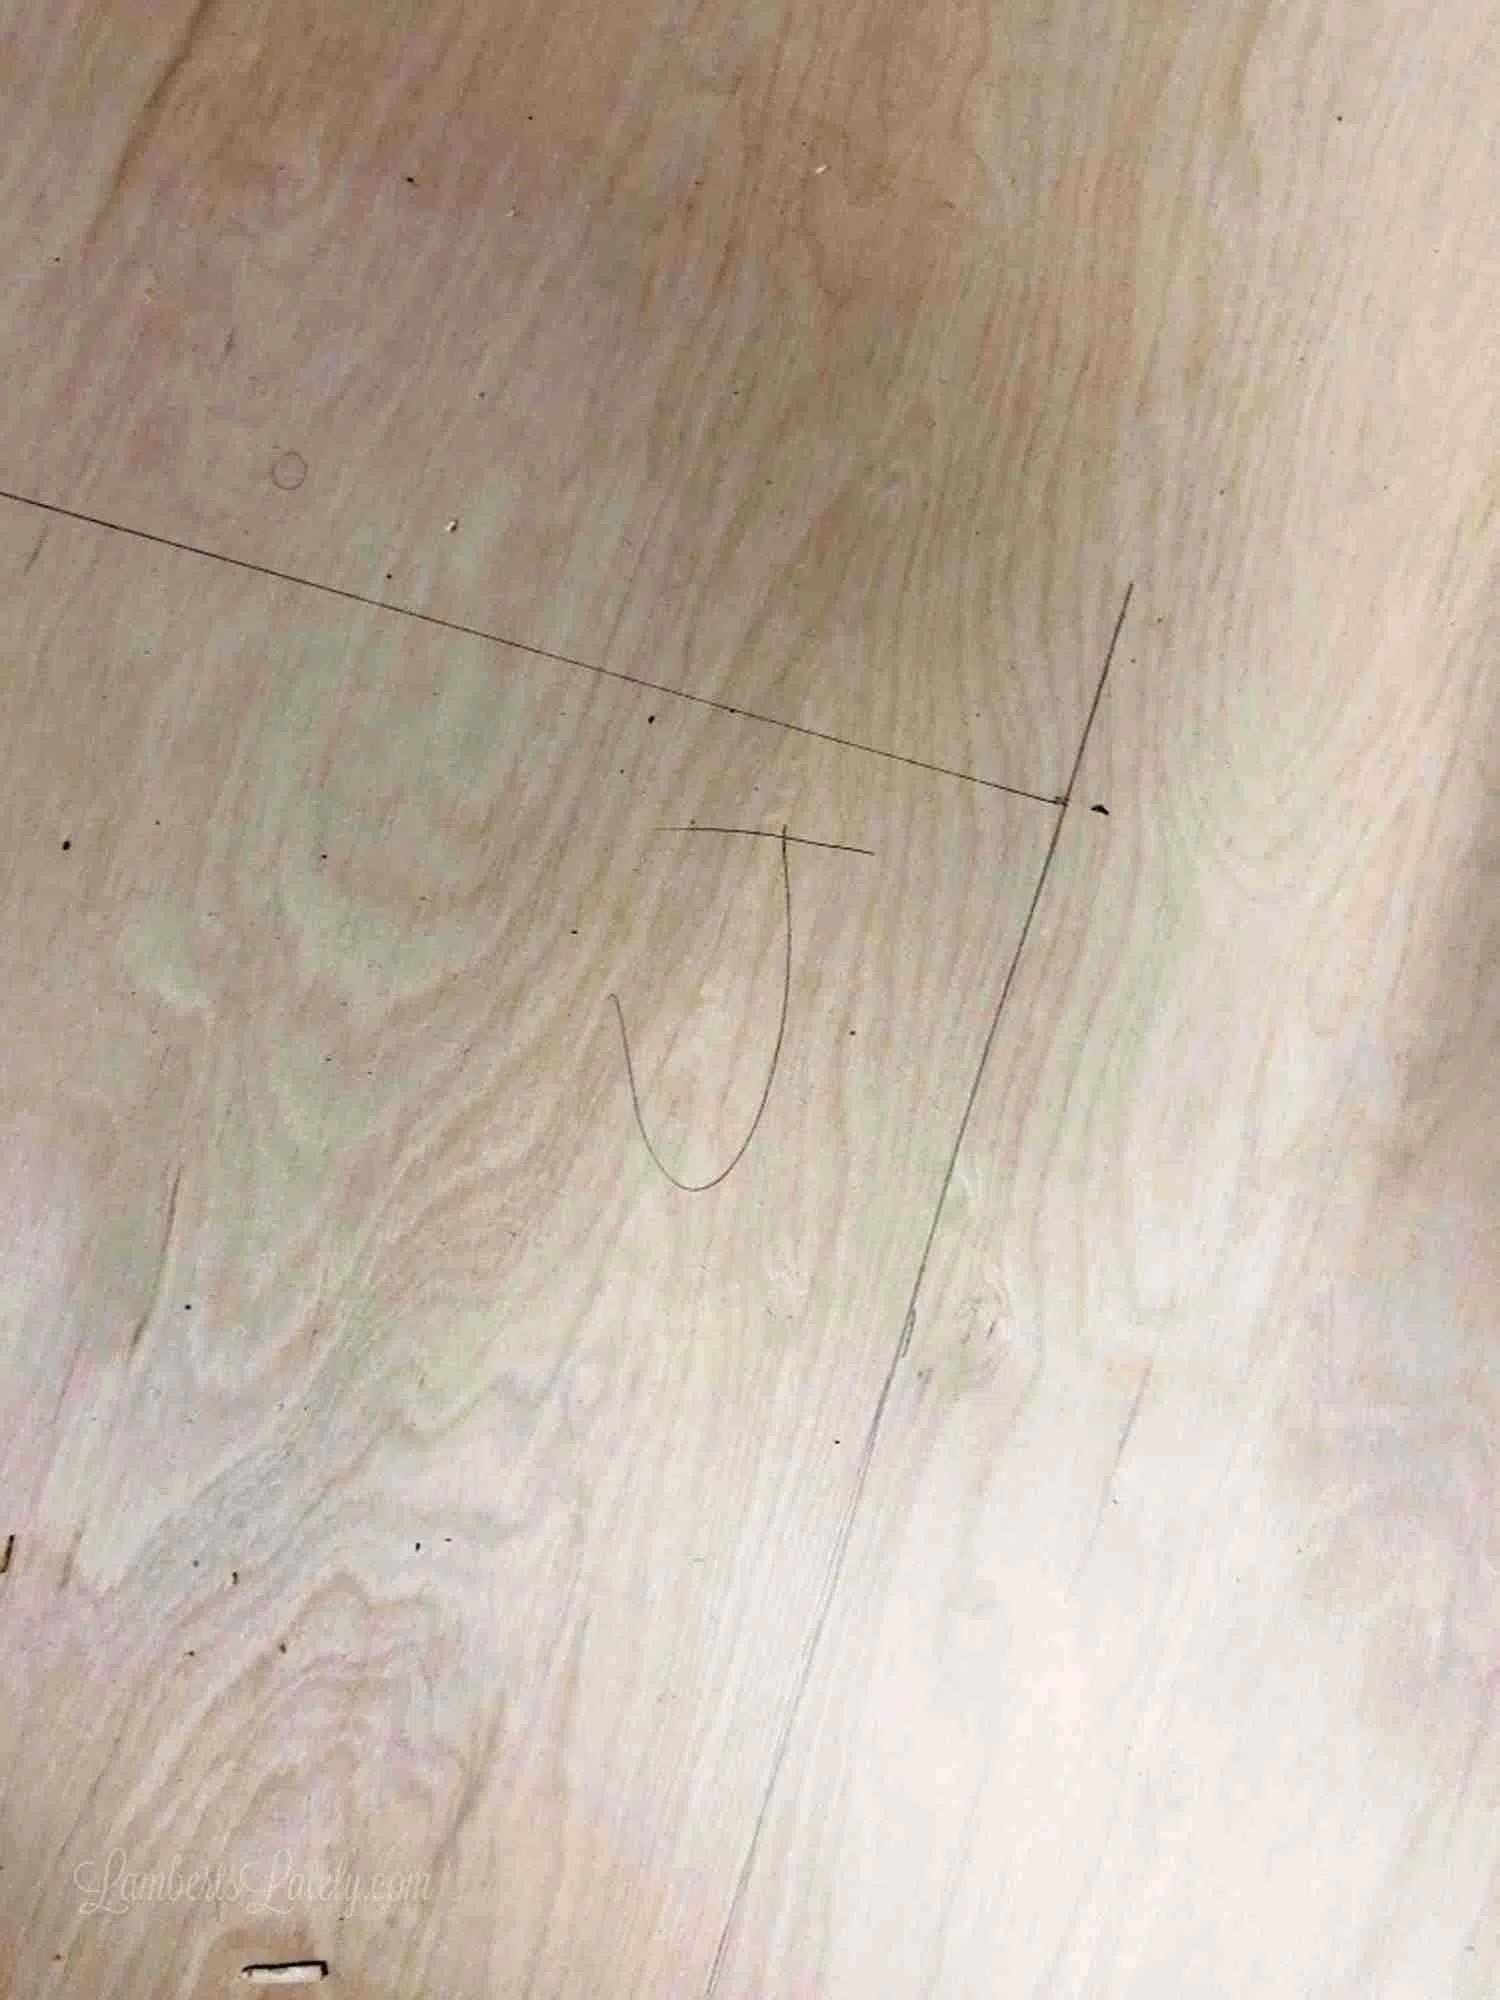 90 degree angle penciled on a piece of wood, marked with a J.